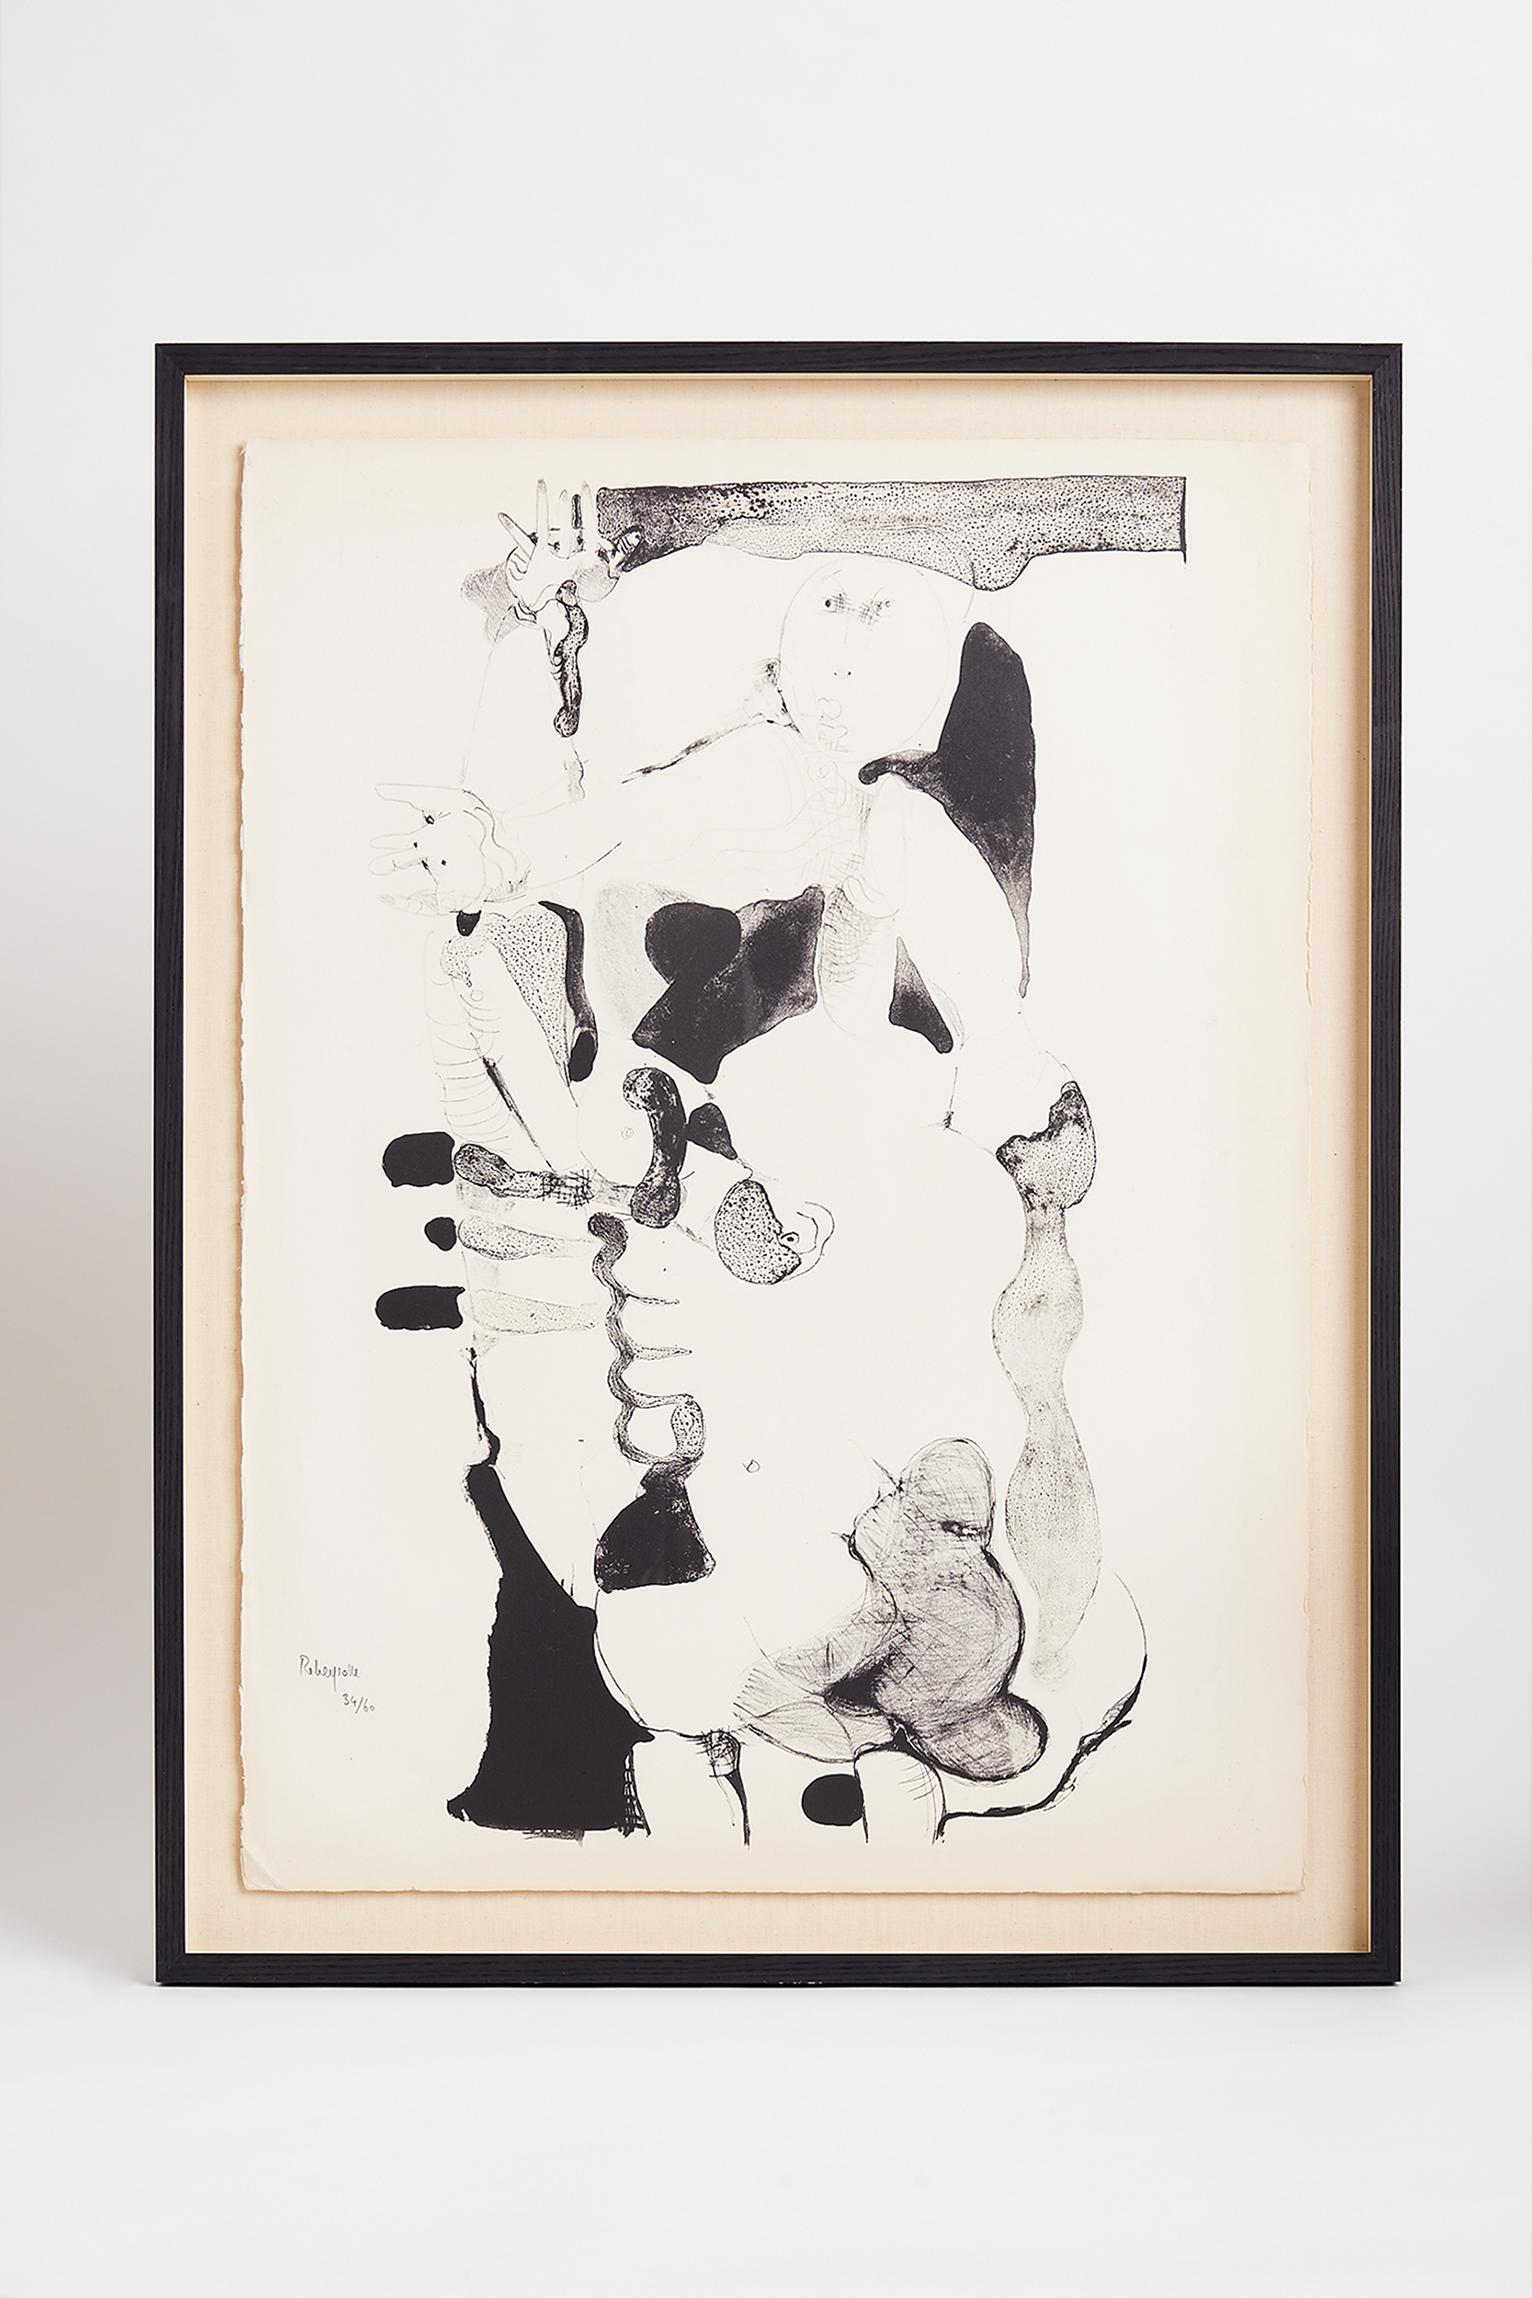 Paul Rebeyrolle (French, 1926-2005),
circa 1960.
Black and white lithograph, on velum paper. 
Floating in a new linen and stained oak frame.